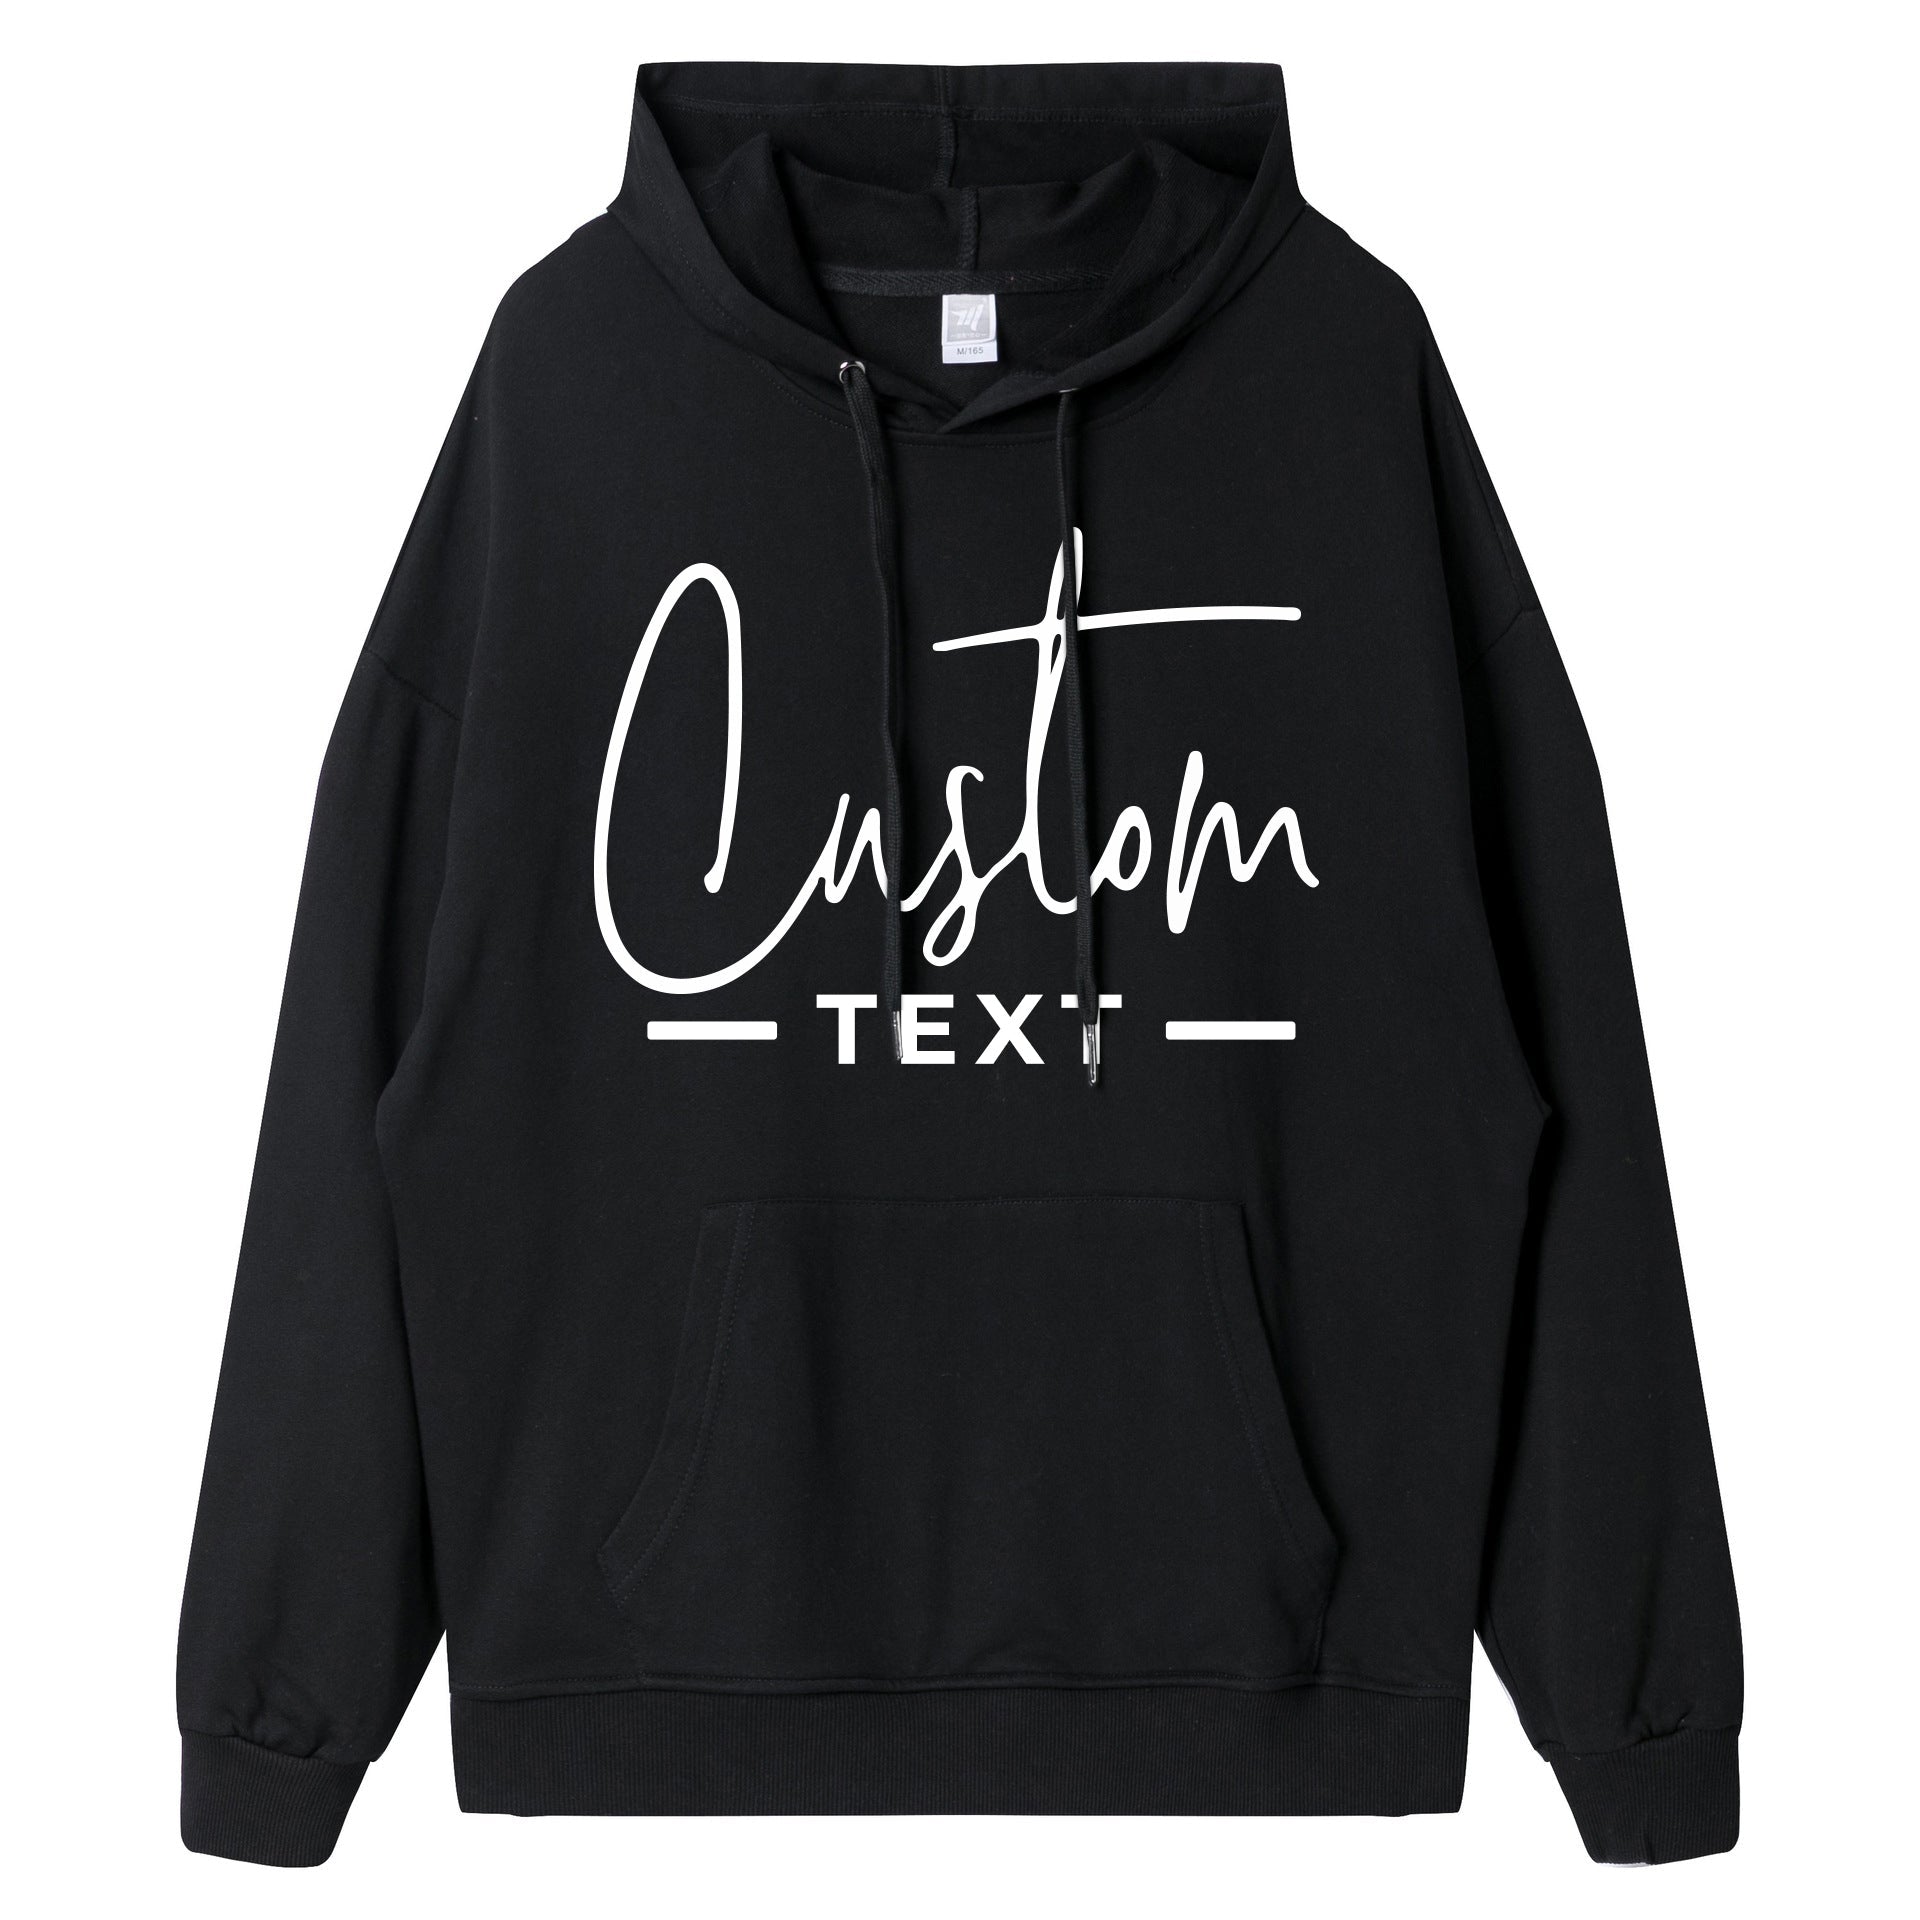 Customized Text Printed Pocket Hoodie